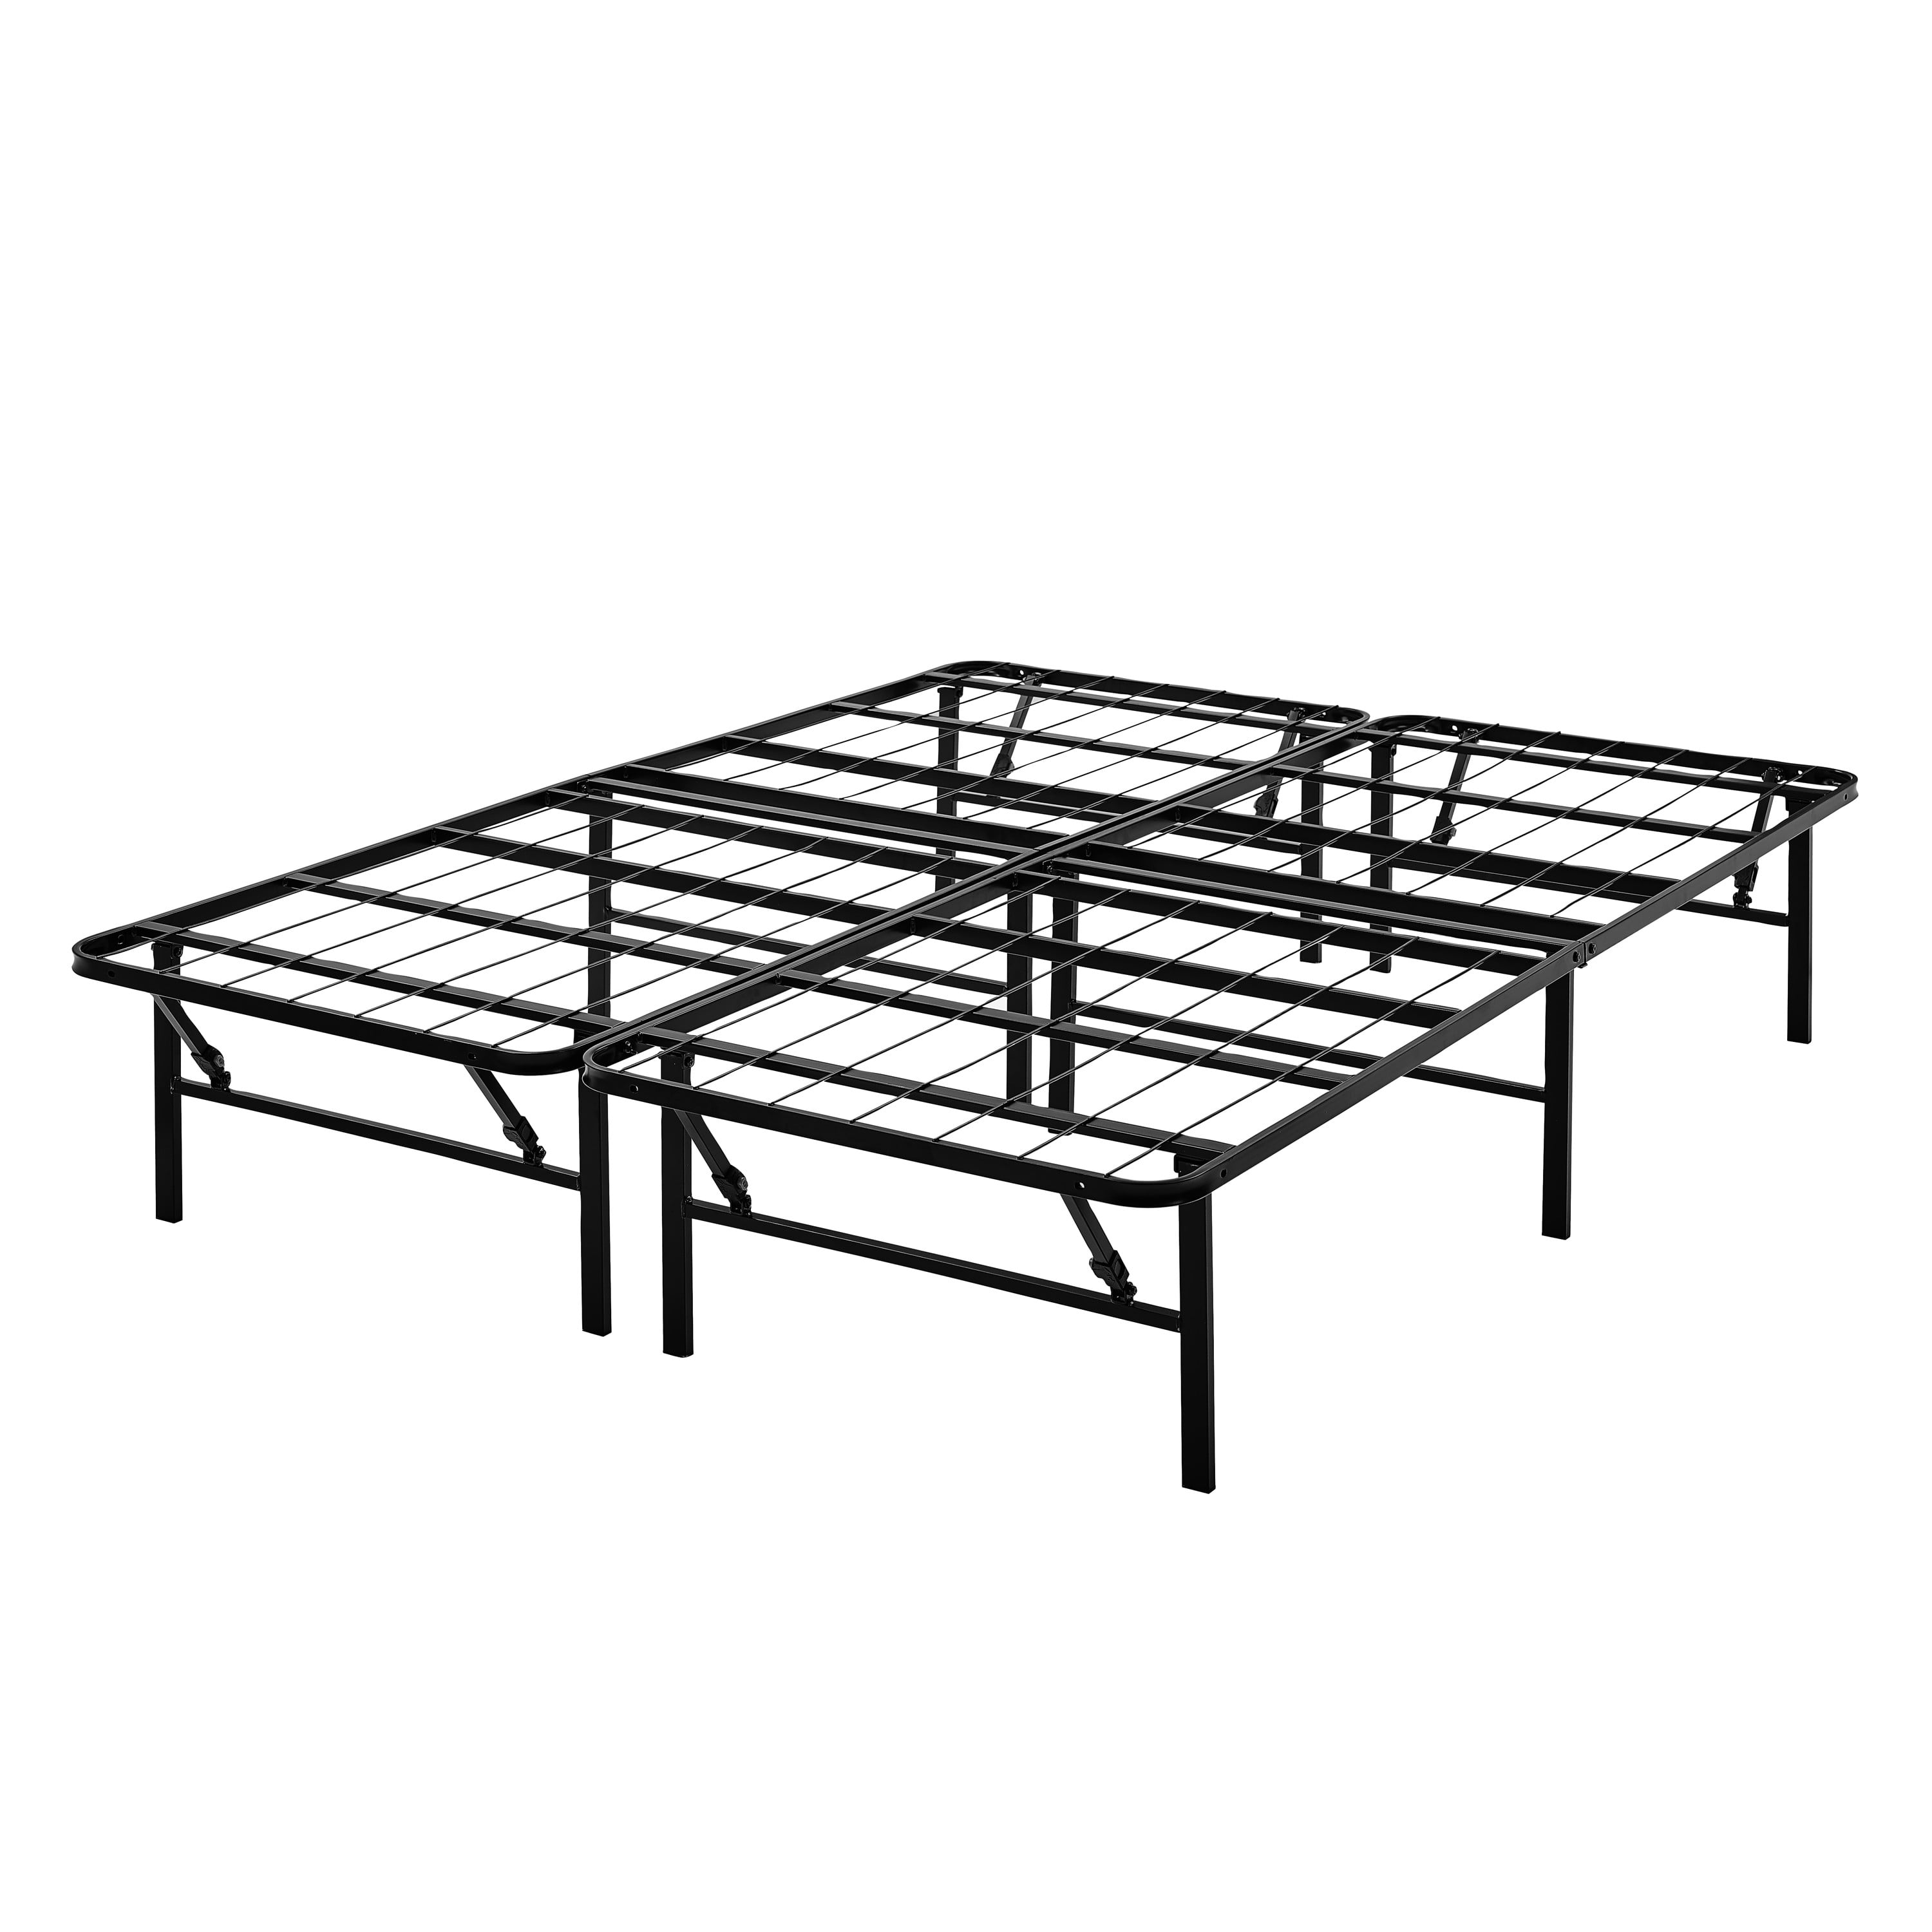 Profile Foldable Steel Bed Frame, Mainstays Metal Bed Bedroom Furniture Twin Size Frame White